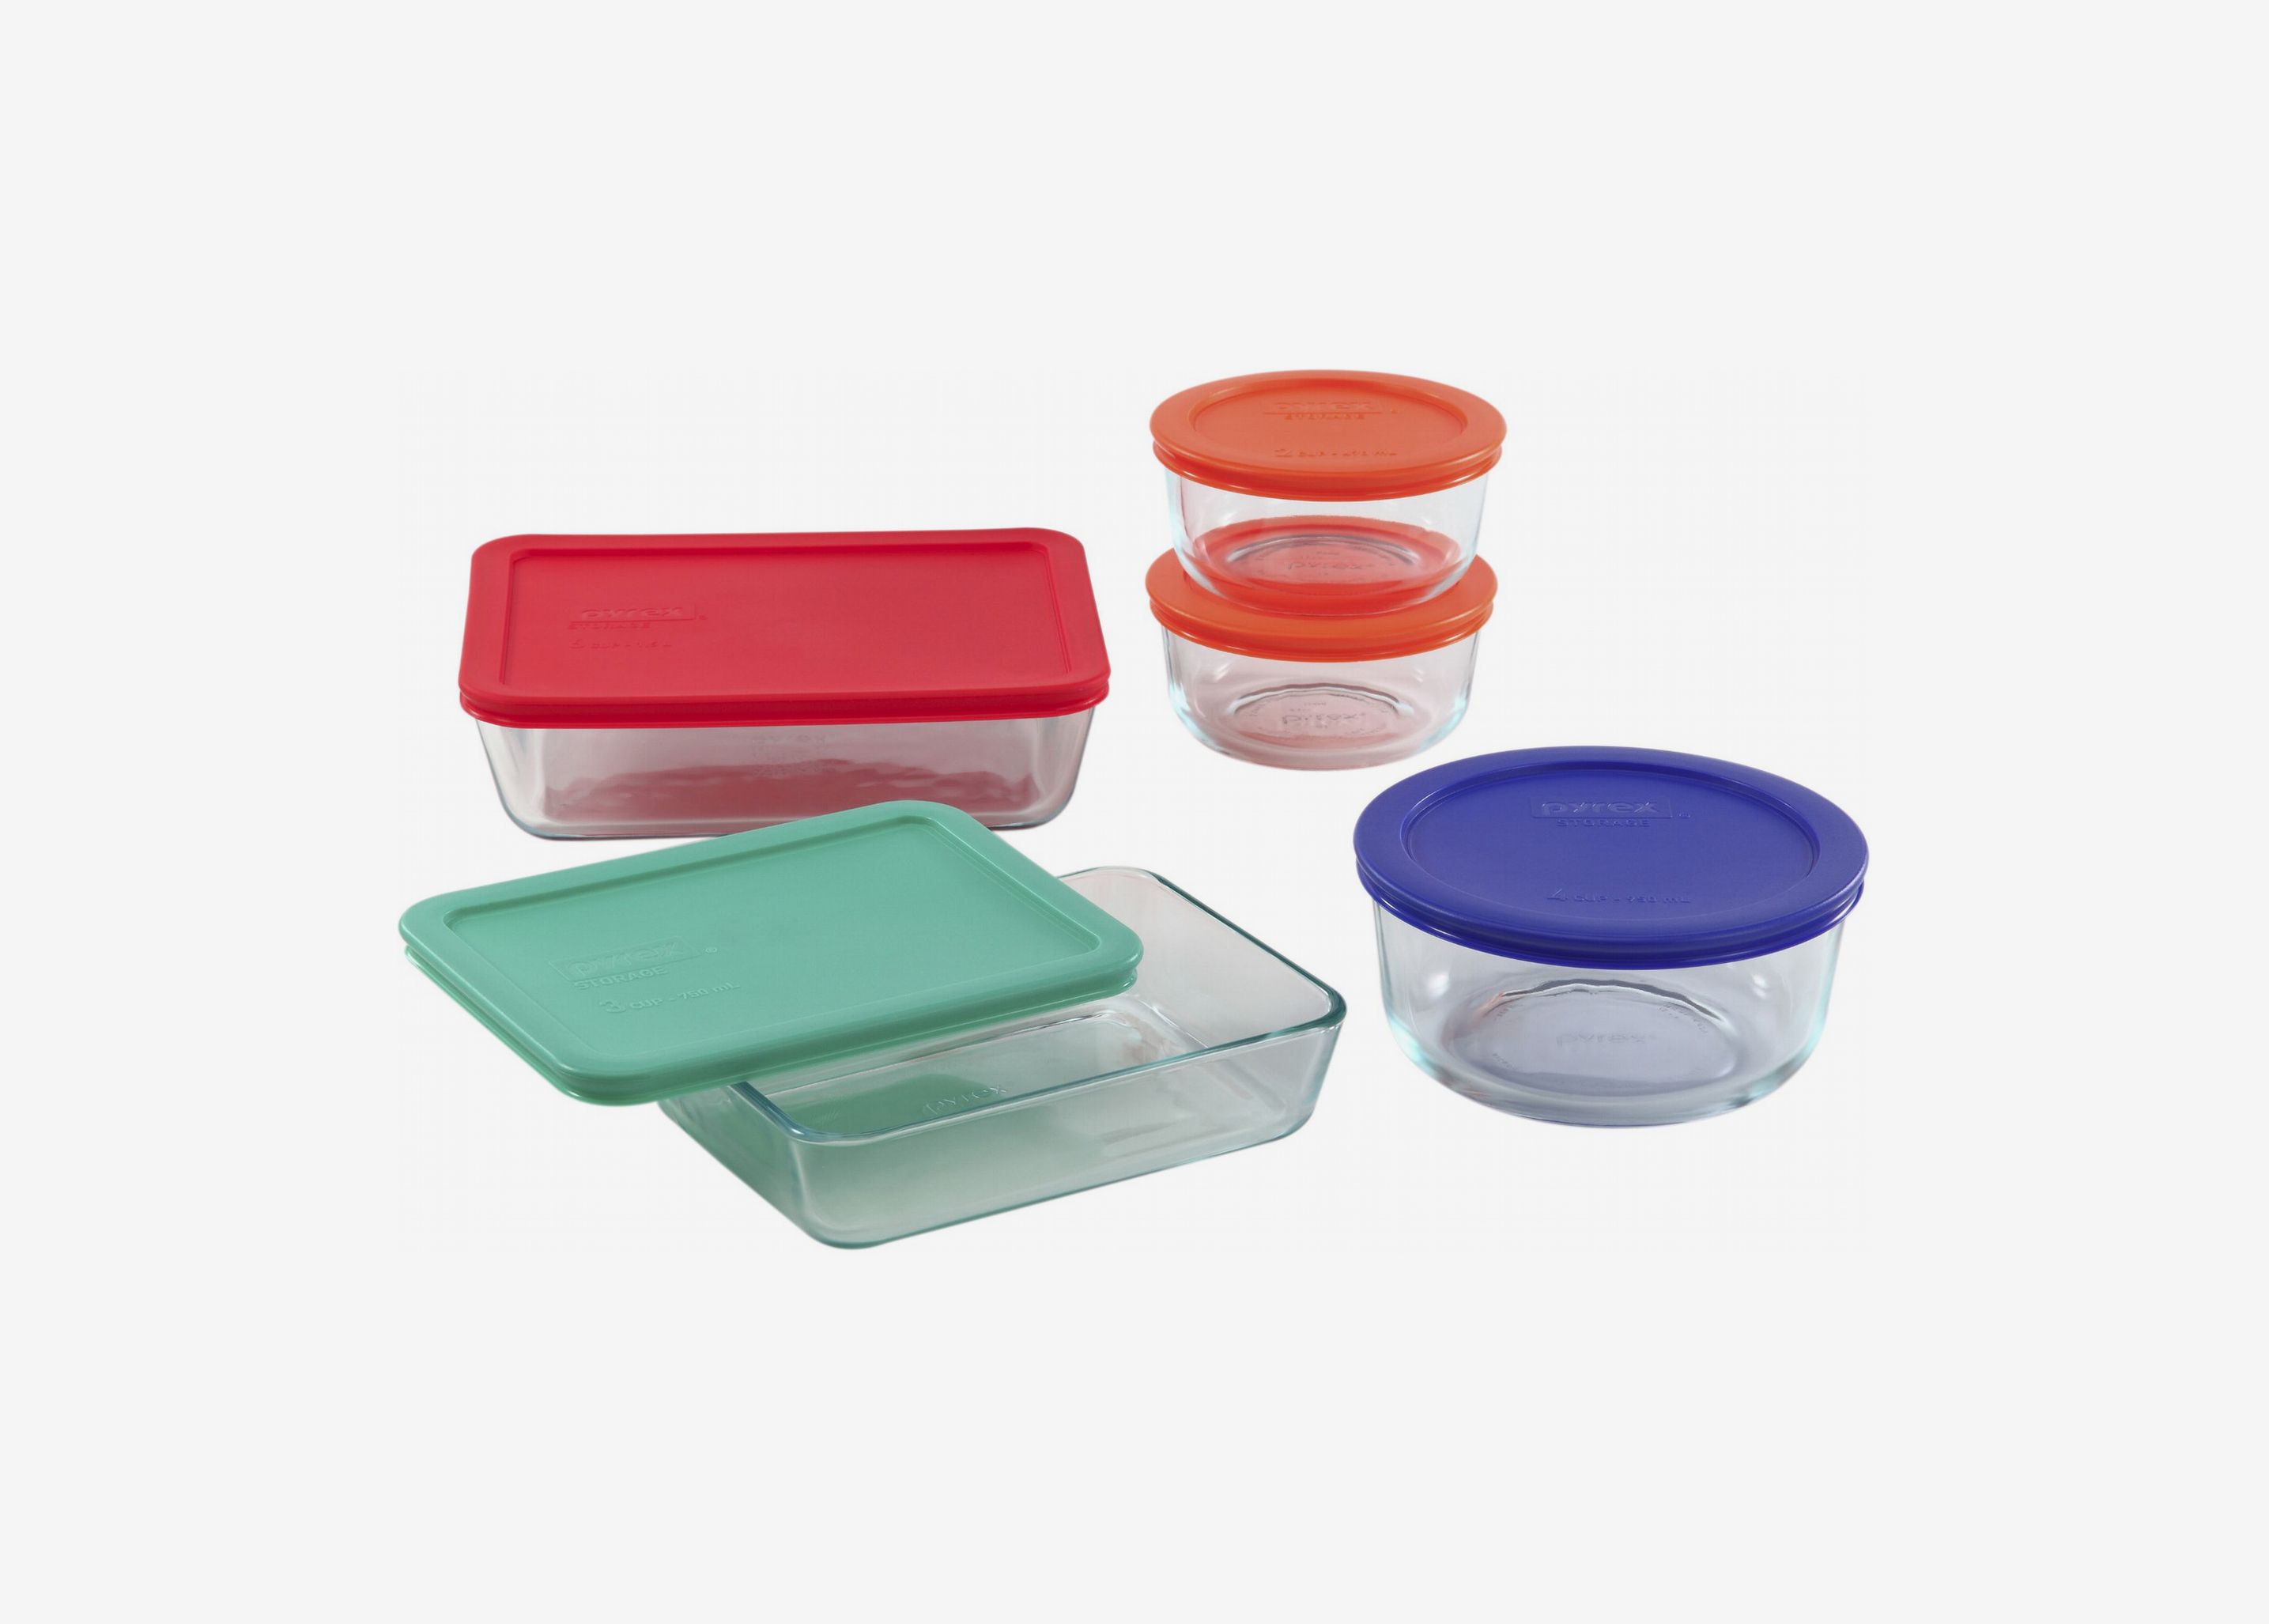 12 X PLASTIC CONTAINERS LID 3 SHAPES,3" X 2" BRILLIANT VALUE 4 ANY PREZZI 